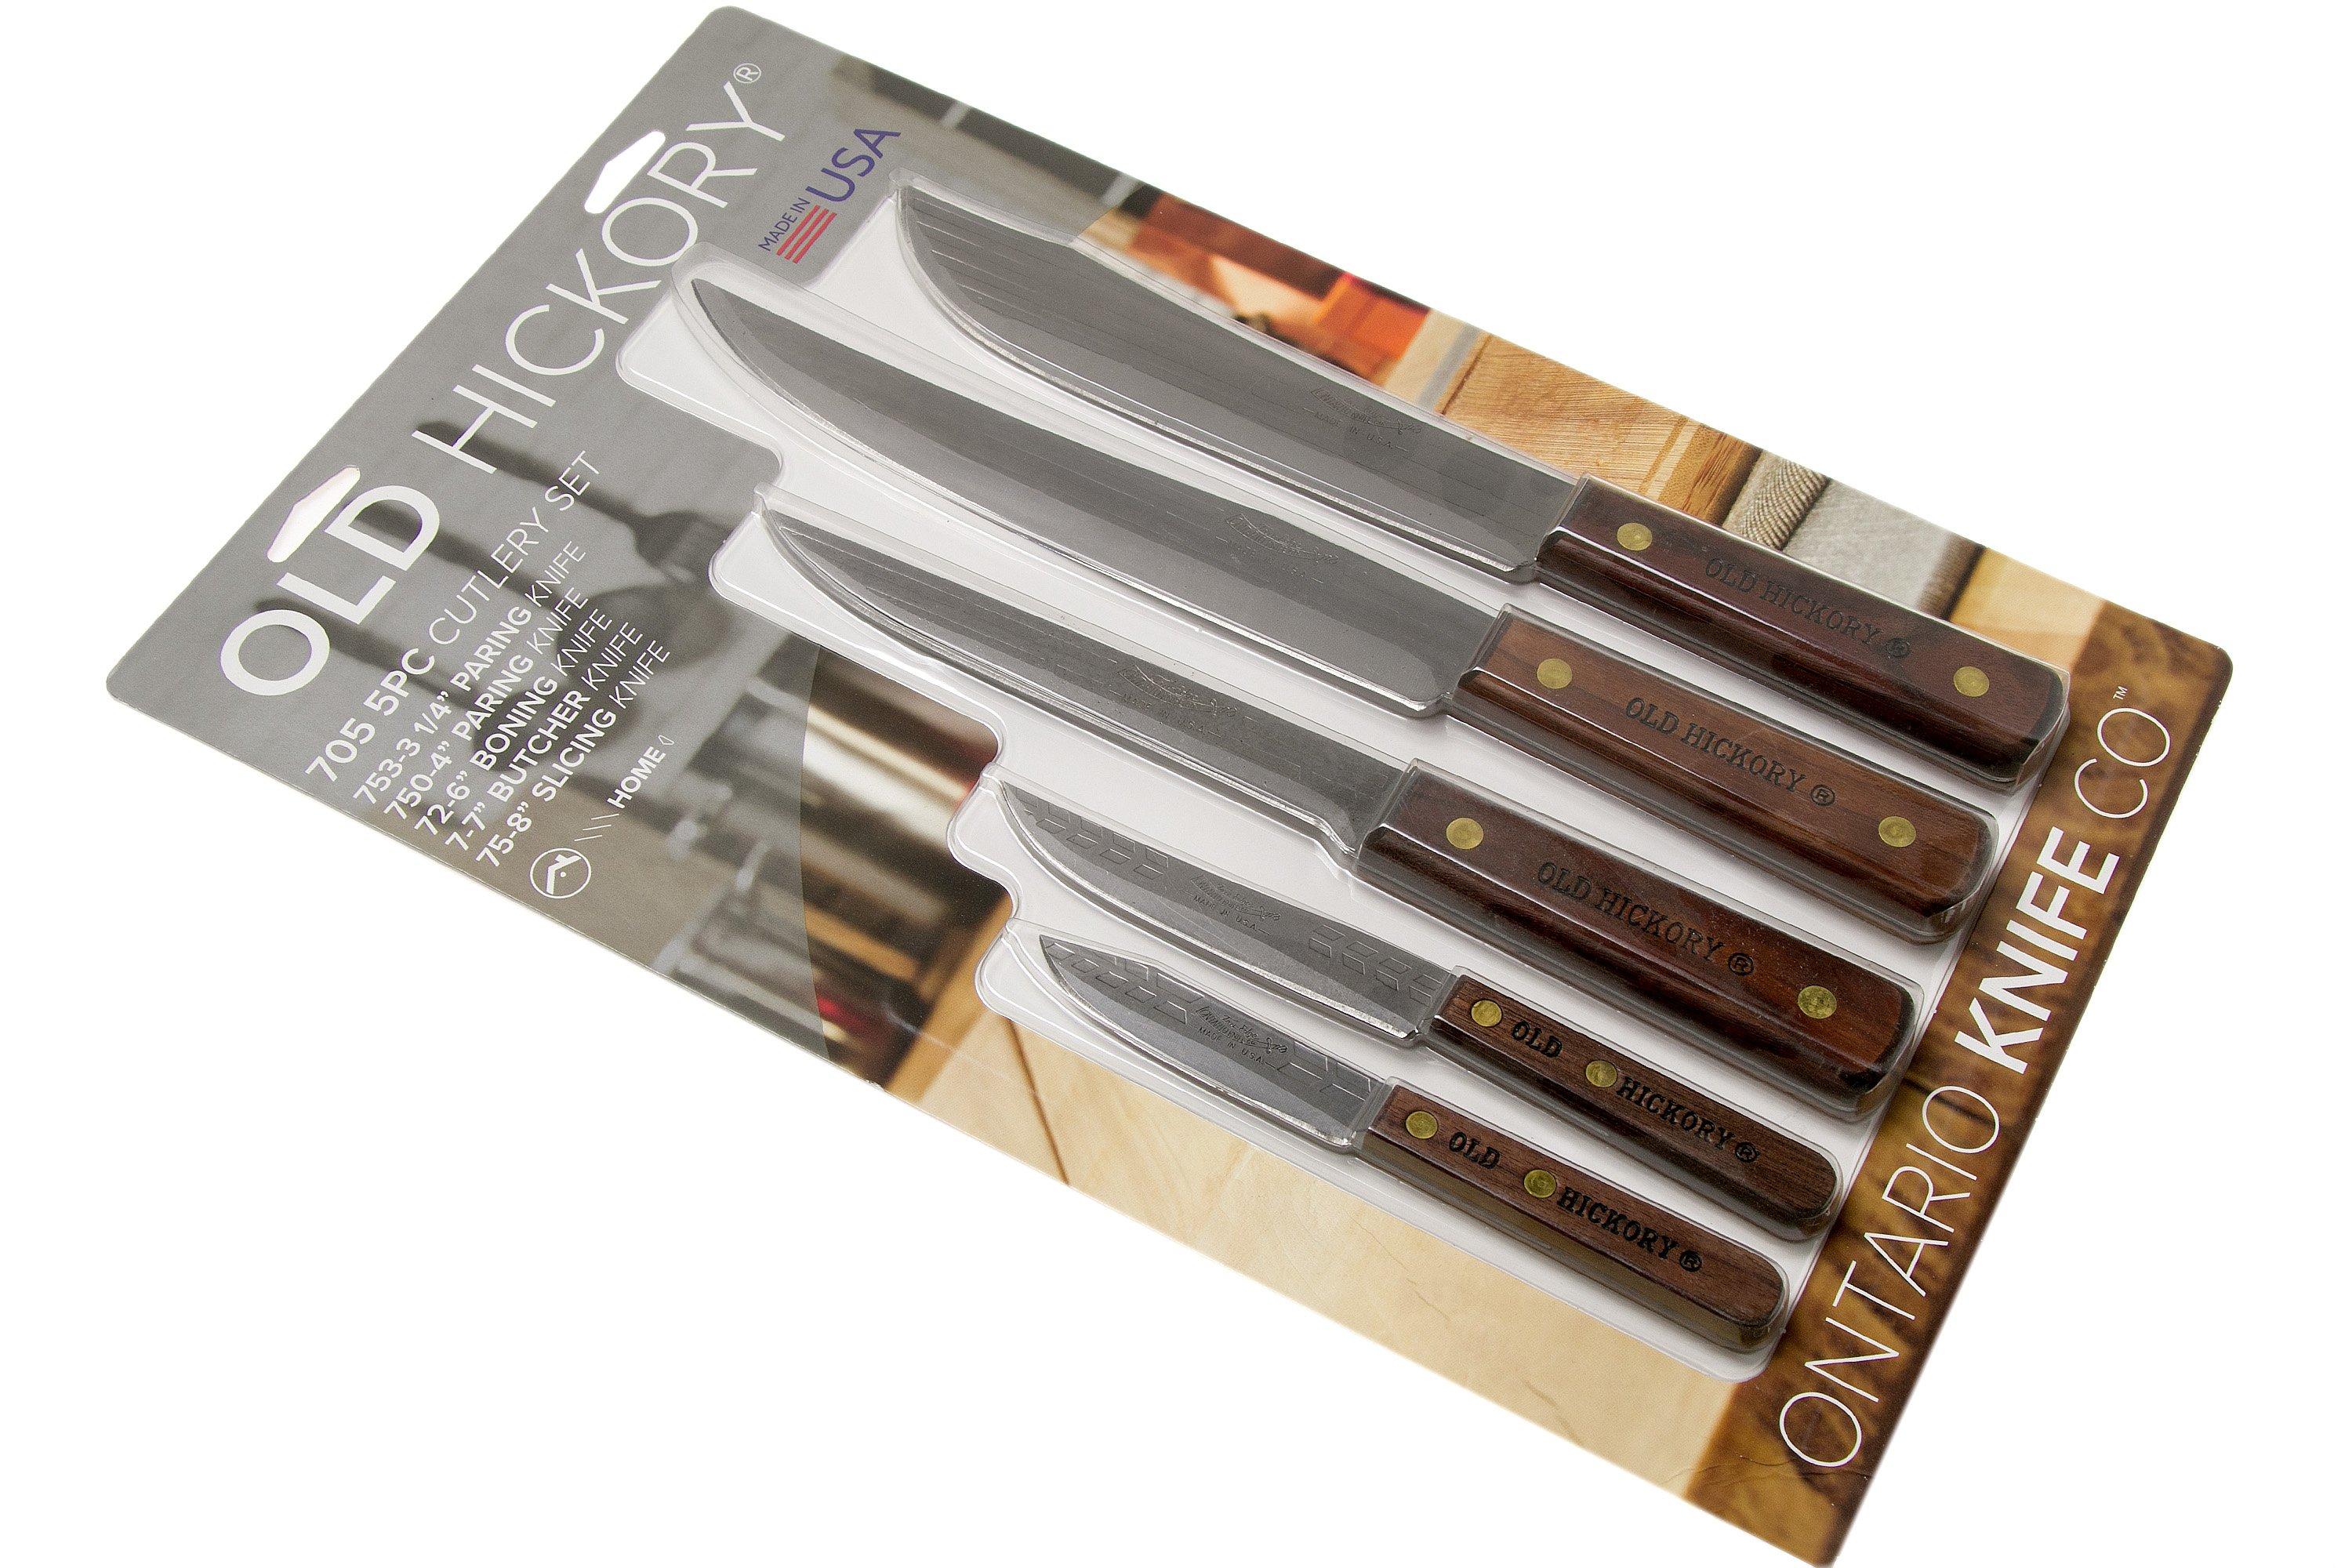 Ontario Old Hickory 5-piece knife set, 7180  Advantageously shopping at